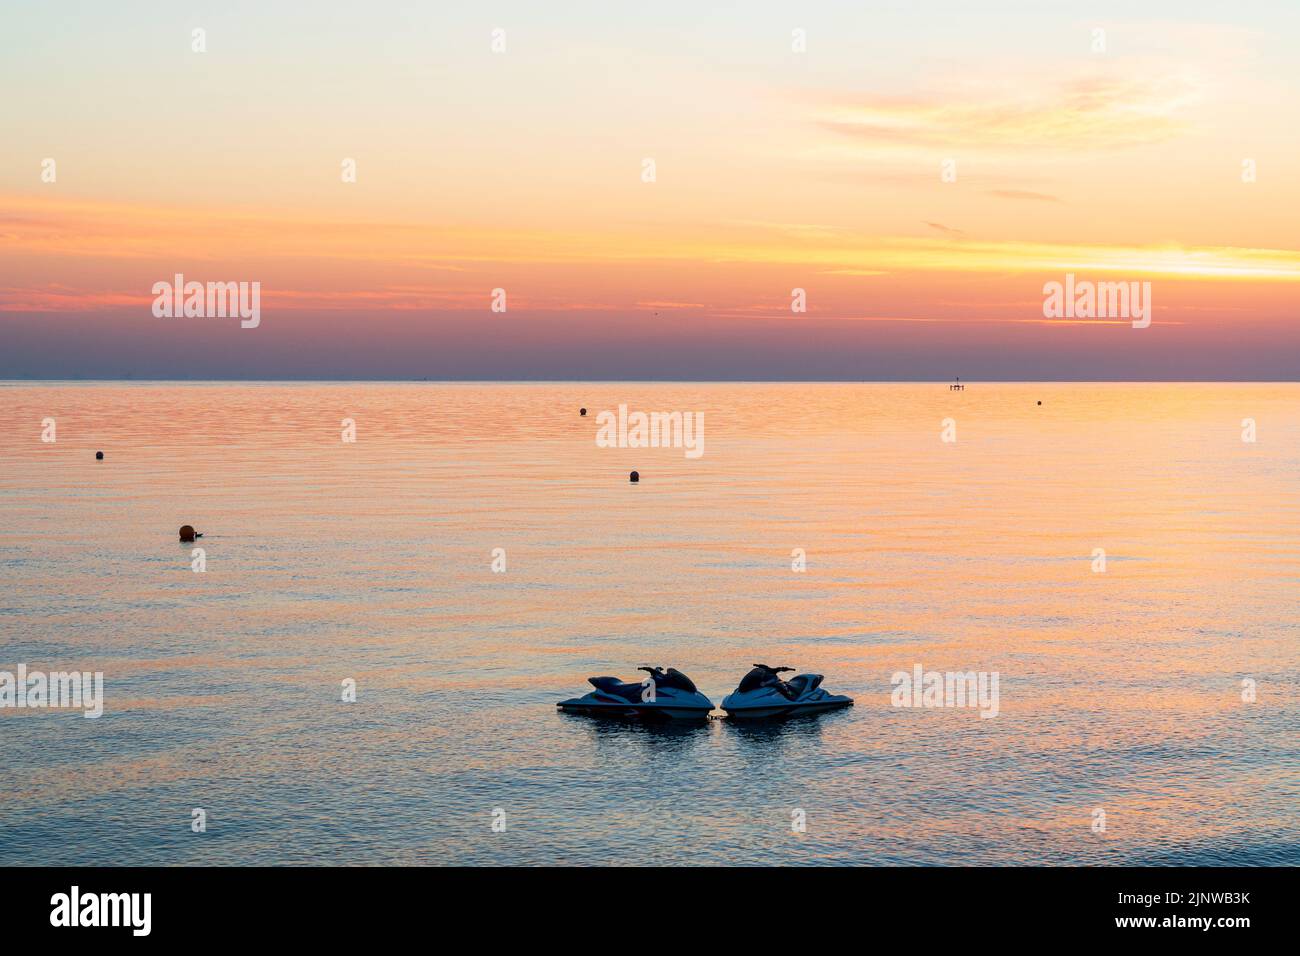 Dawn sky over the North Sea seen from Herne Bay on the English Kent coast. Orange sky with the colour reflecting in the calm water, and in the foreground a pair of jet skis moored in the sea and the main beach. Stock Photo